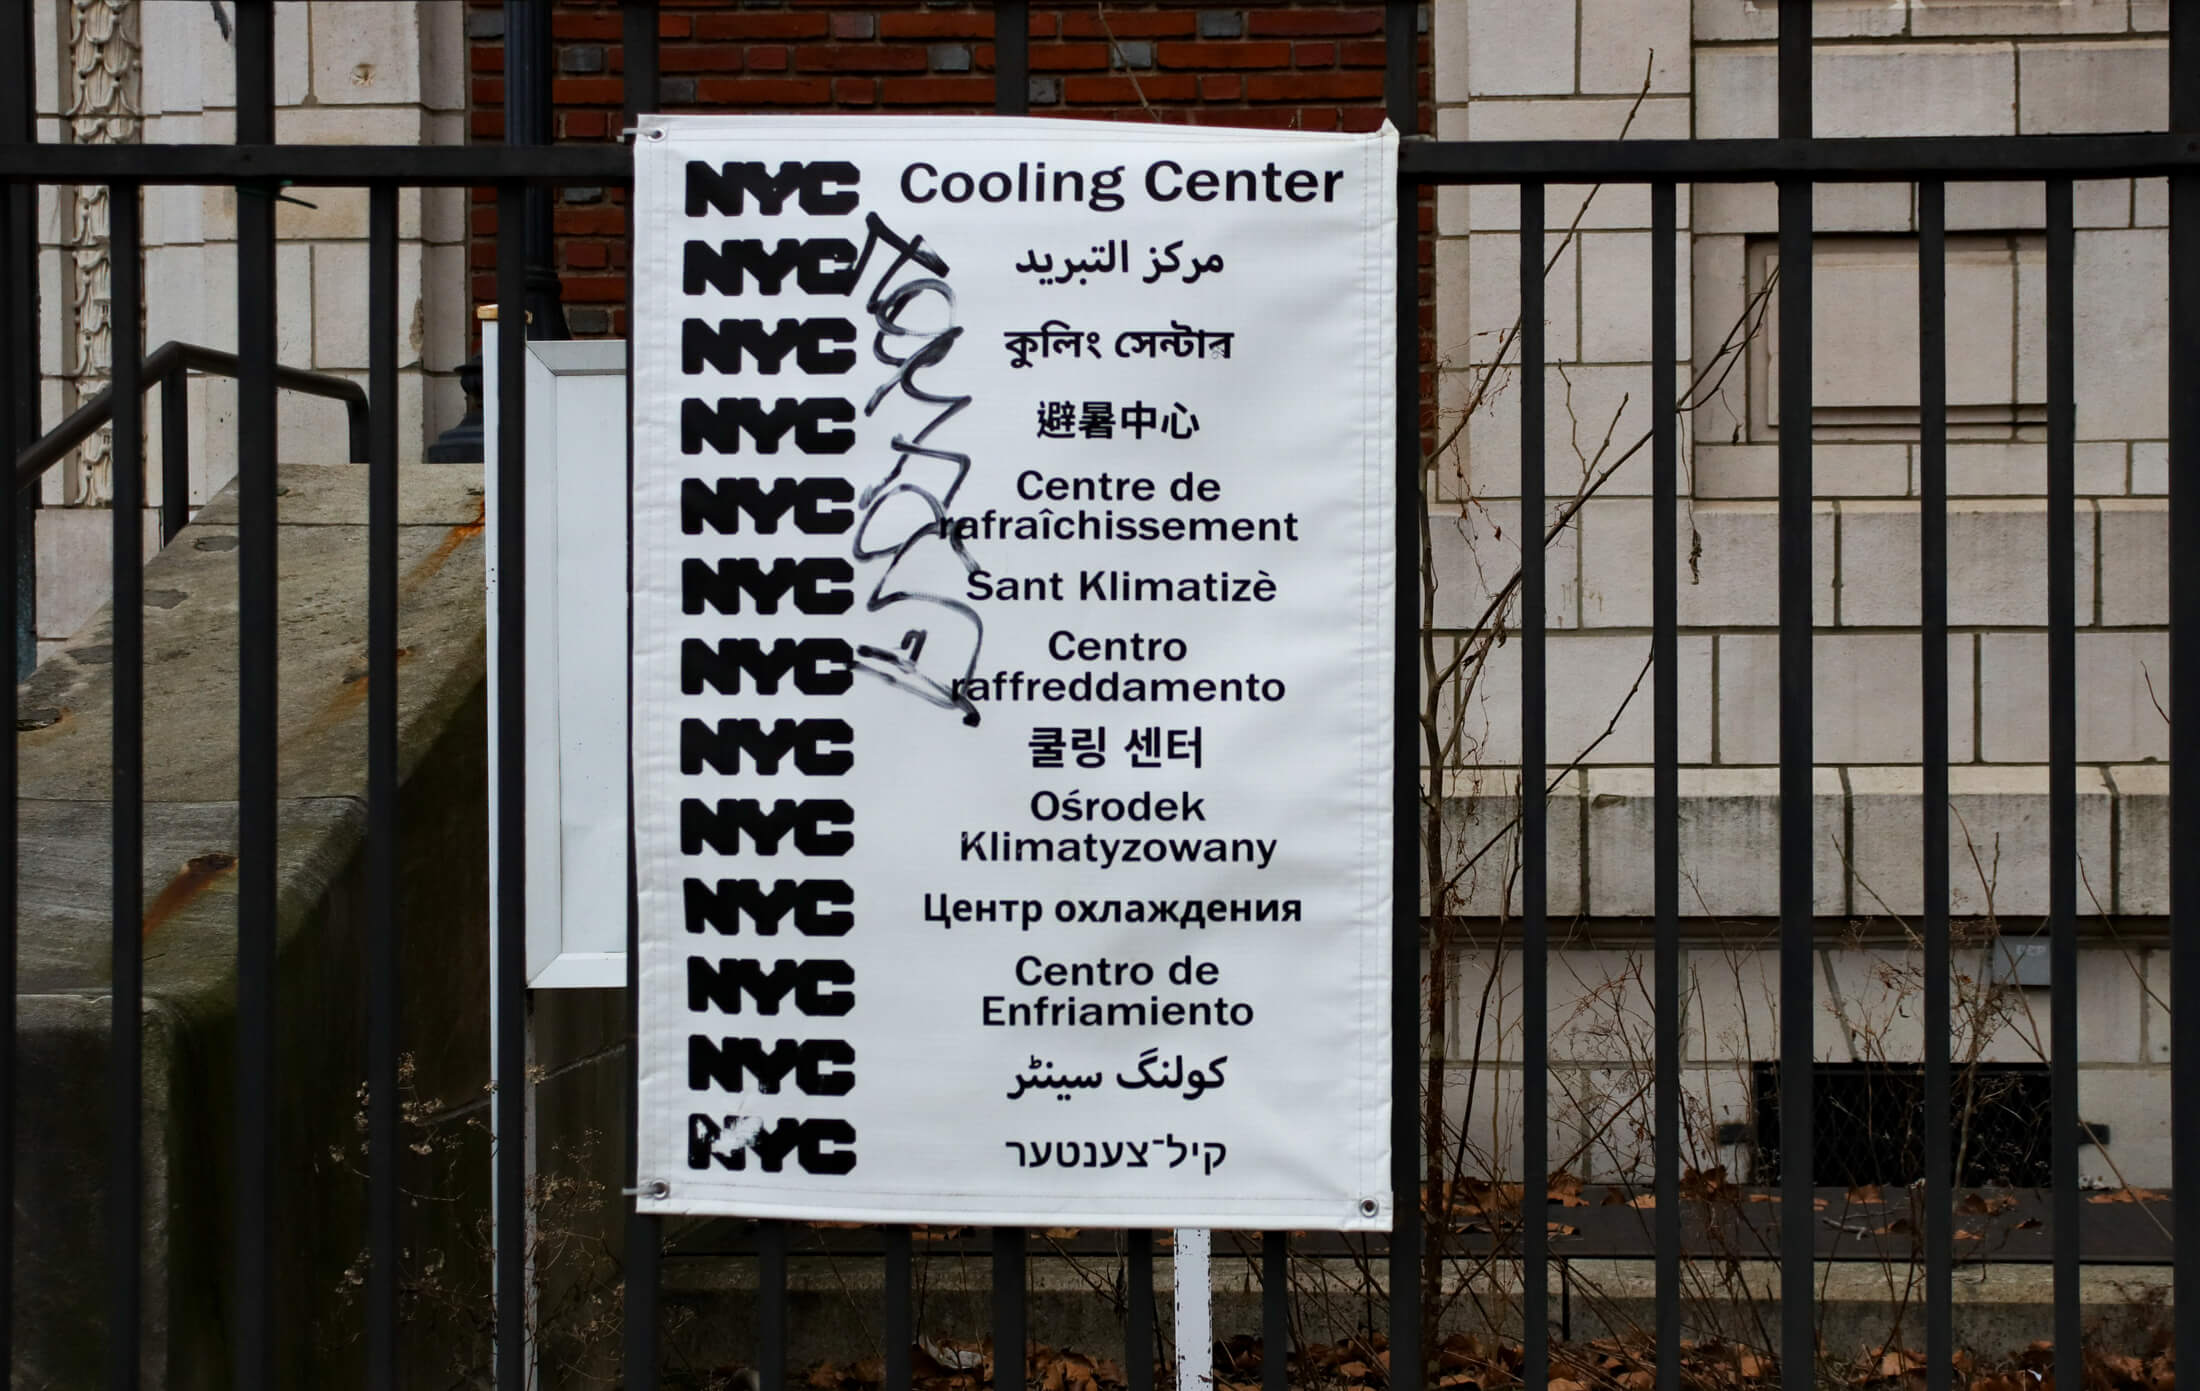 cooling center sign in multiple languages